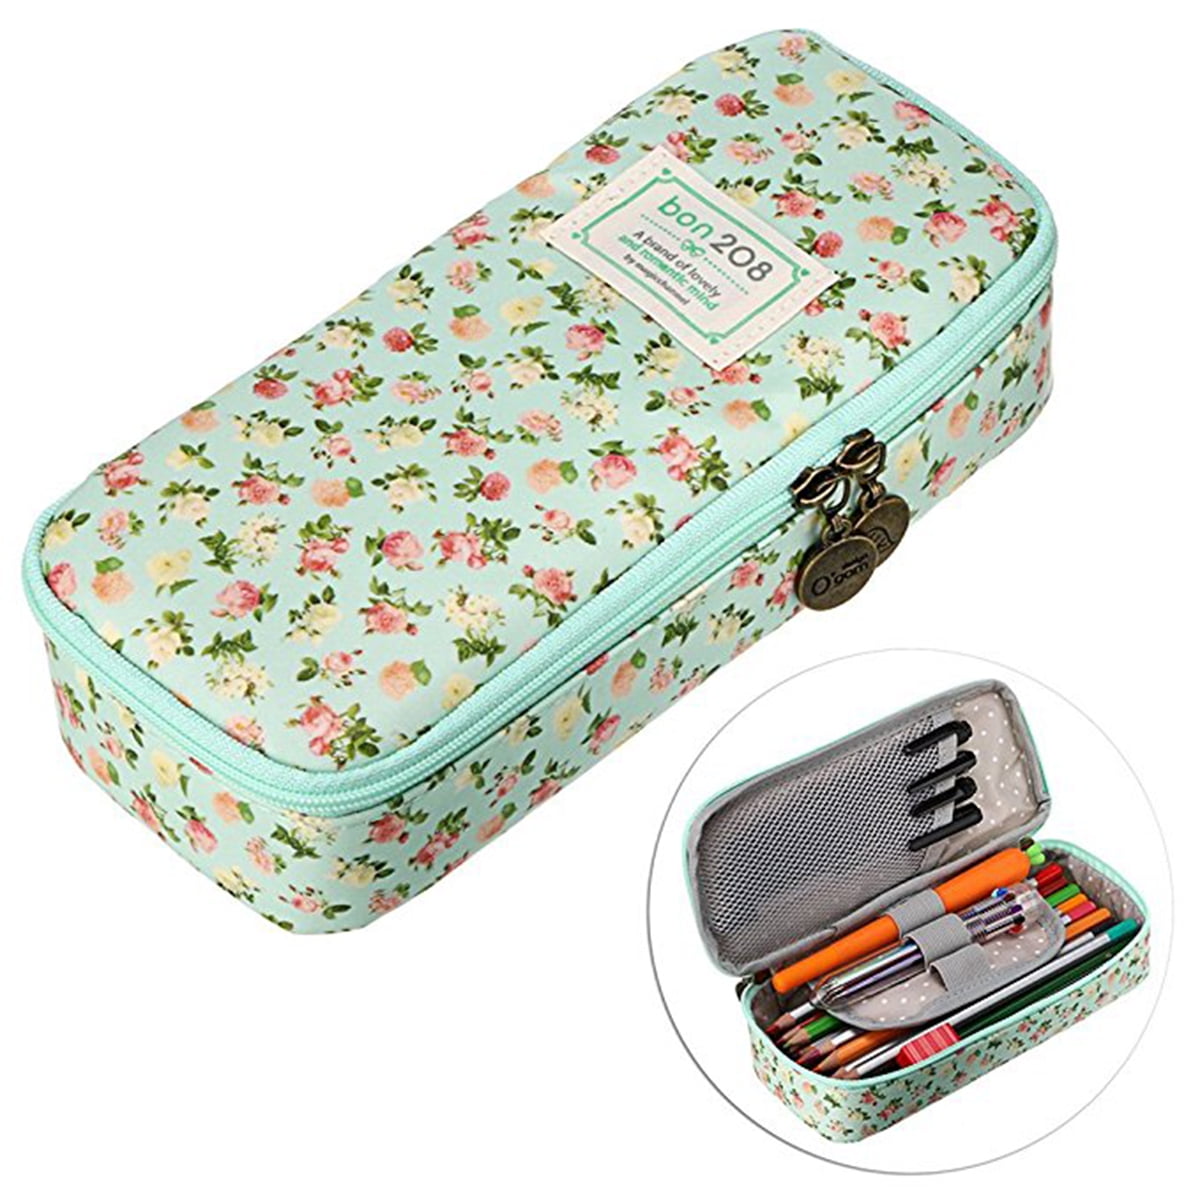 Rivatimrio Ditsy Floral Beige Pencil Case Large Capacity Aesthetic Blossom  Pen Pouch Bag Office College School Stationery Pen Marker Box Storage